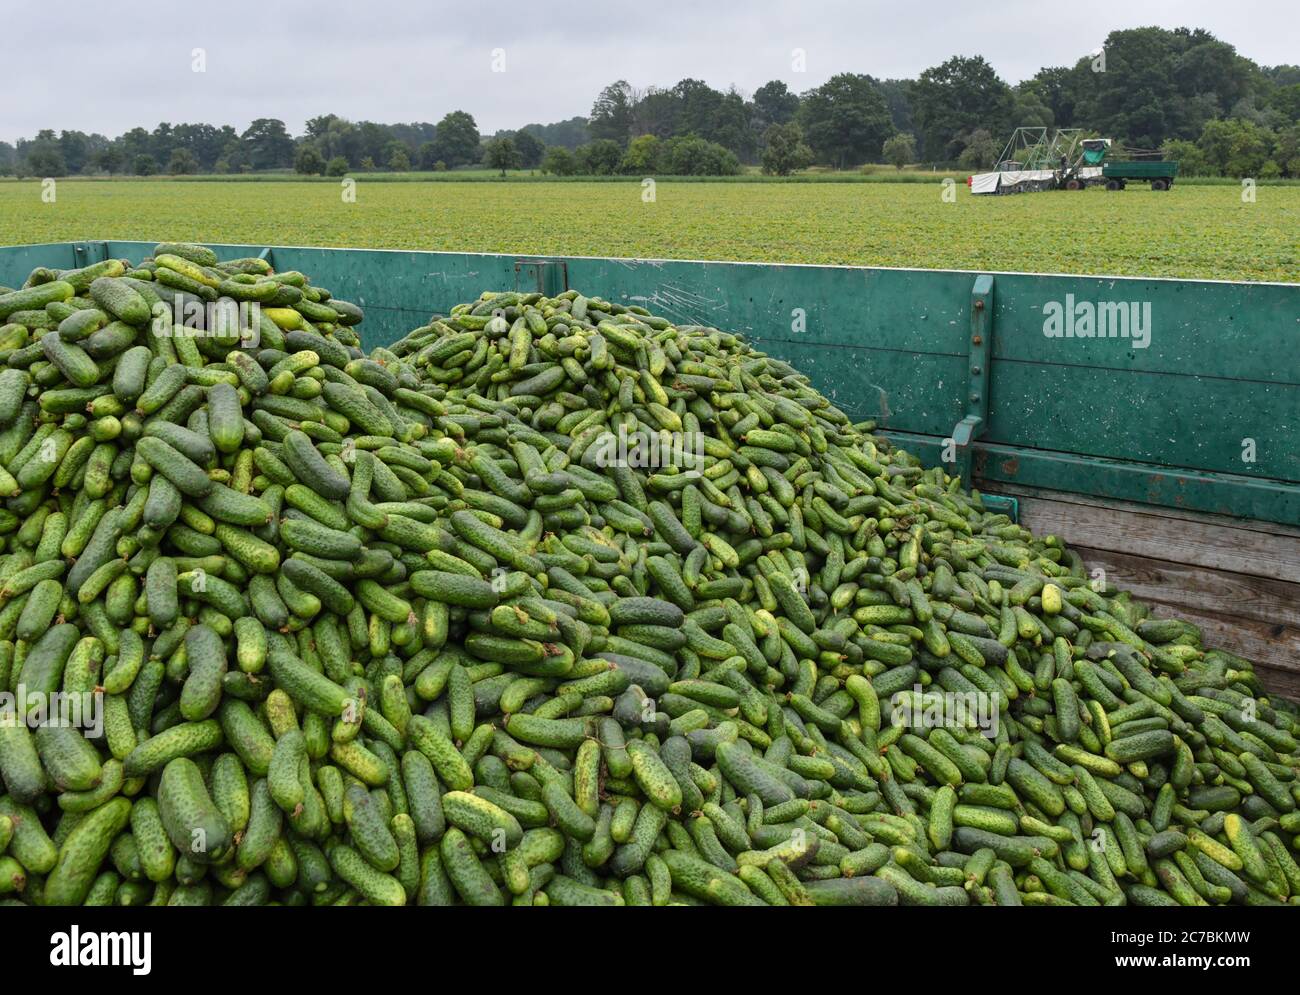 16 July 2020, Brandenburg, Kasel-Golzig: A trailer full of pickled gherkins is parked in a field belonging to Knösels Gemüse-Erzeugungs GmbH & Co. KG. The harvest of the Spreewald gherkin is currently running at full speed. In the Spreewald there is a multitude of large and small companies that cultivate and also process pickled gherkins. Since 1995 Knösels Gemüse-Erzeugungs GmbH & Co. KG has been growing pickled gherkins, red cabbage, pumpkin, zucchini as well as corn and cereals. In the harvesting season, the company employs around 400 seasonal workers from abroad. Photo: Patrick Pleul/dpa-Z Stock Photo